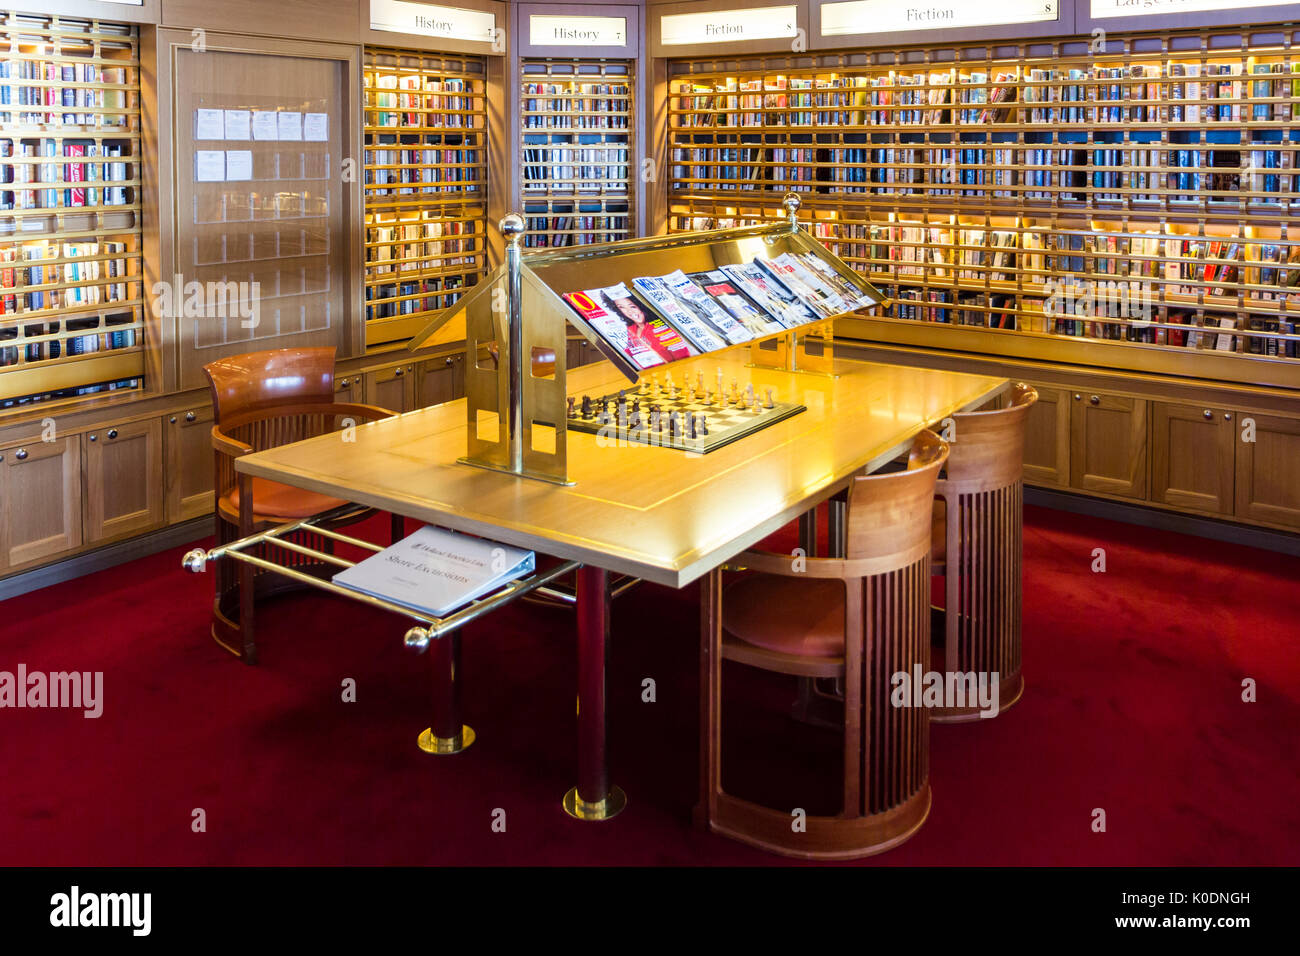 Library on board the Holland America line cruise ship Oosterdam Stock Photo